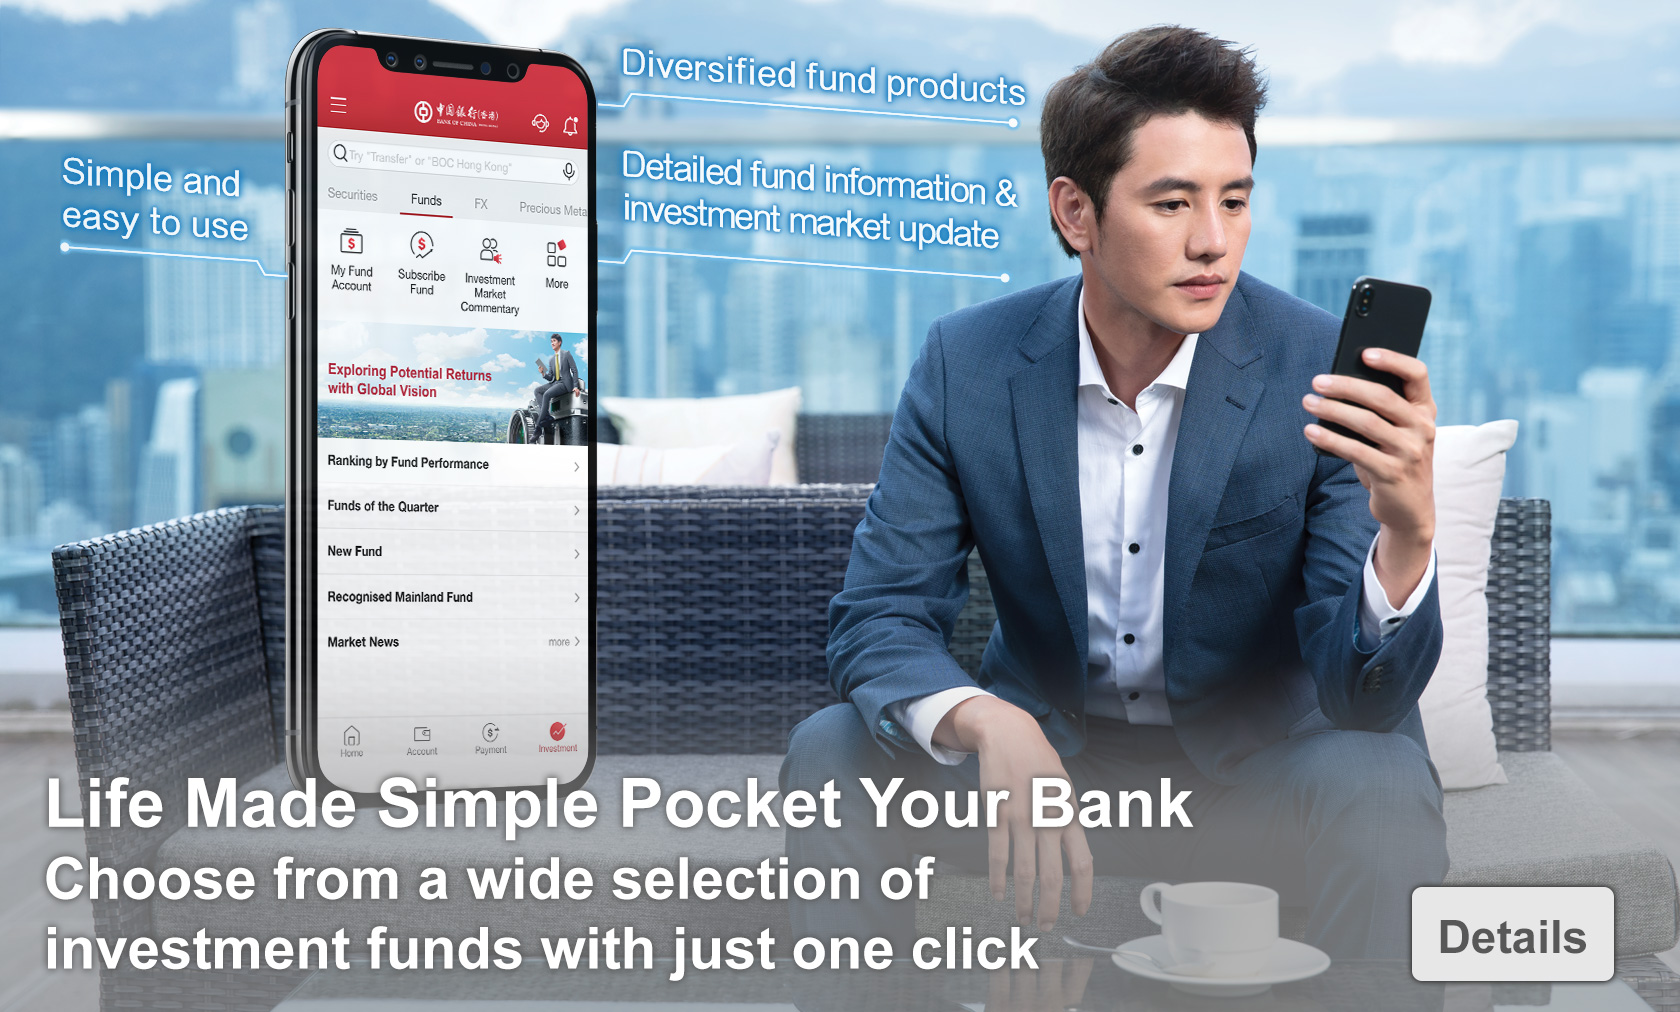 Life Made Simple Pocket Your Bank
        Choose from a wide selection of investment funds with just one click